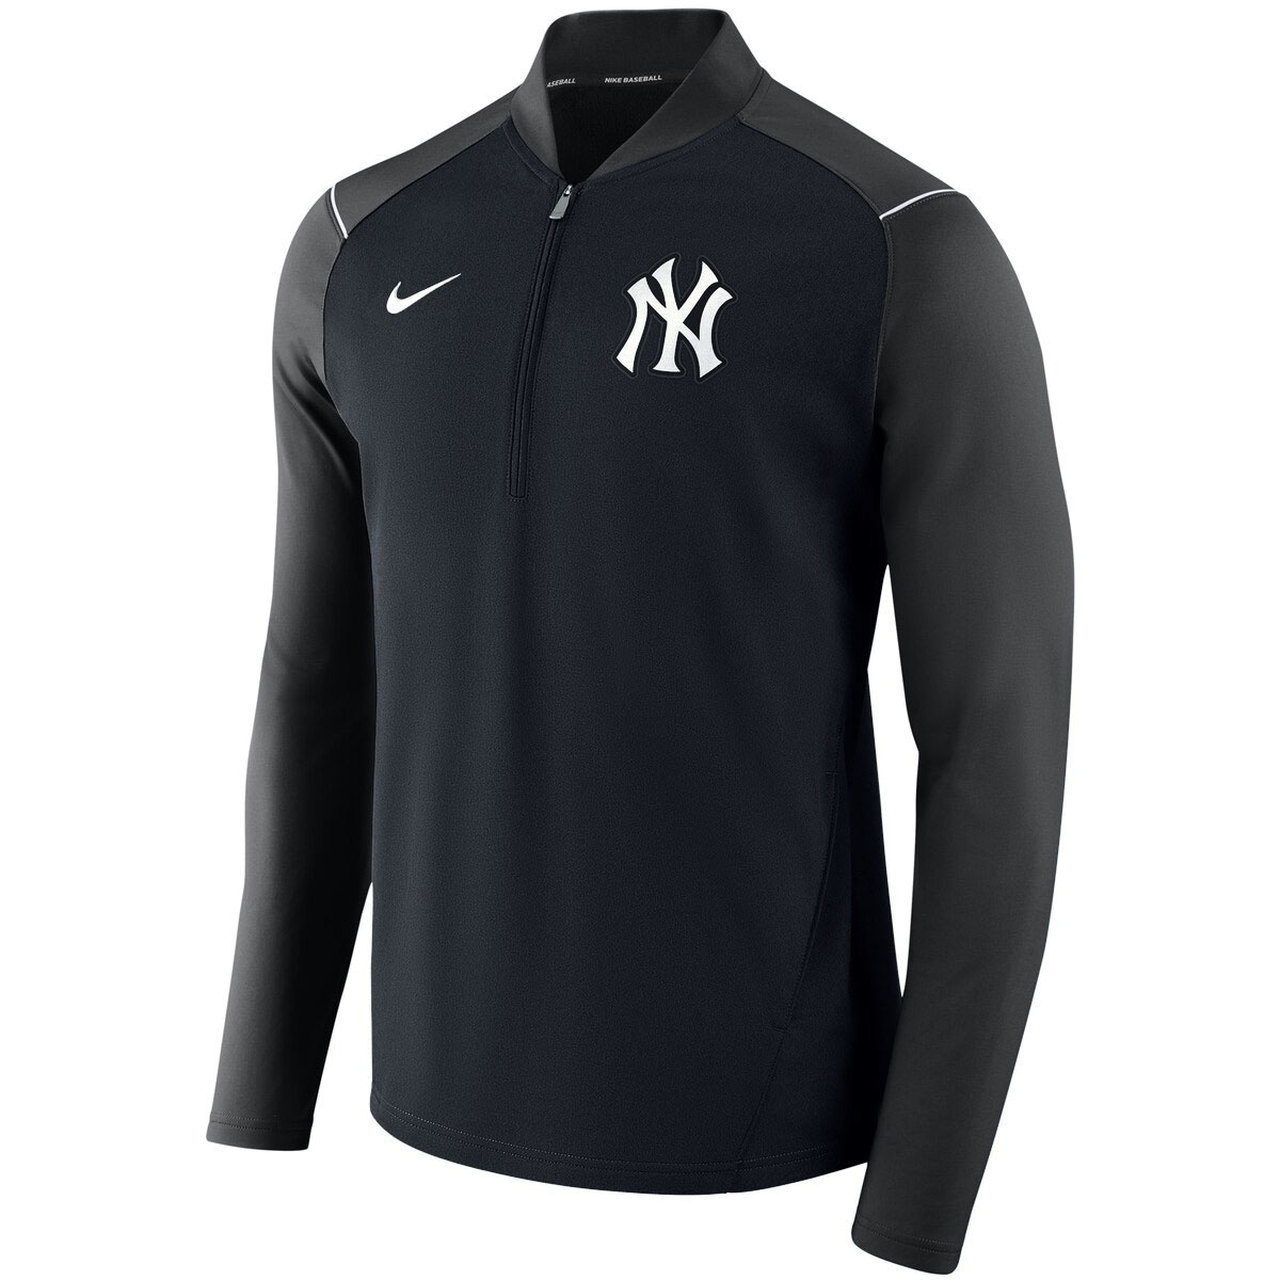 New York Yankees Nike Players Performance Red Polo